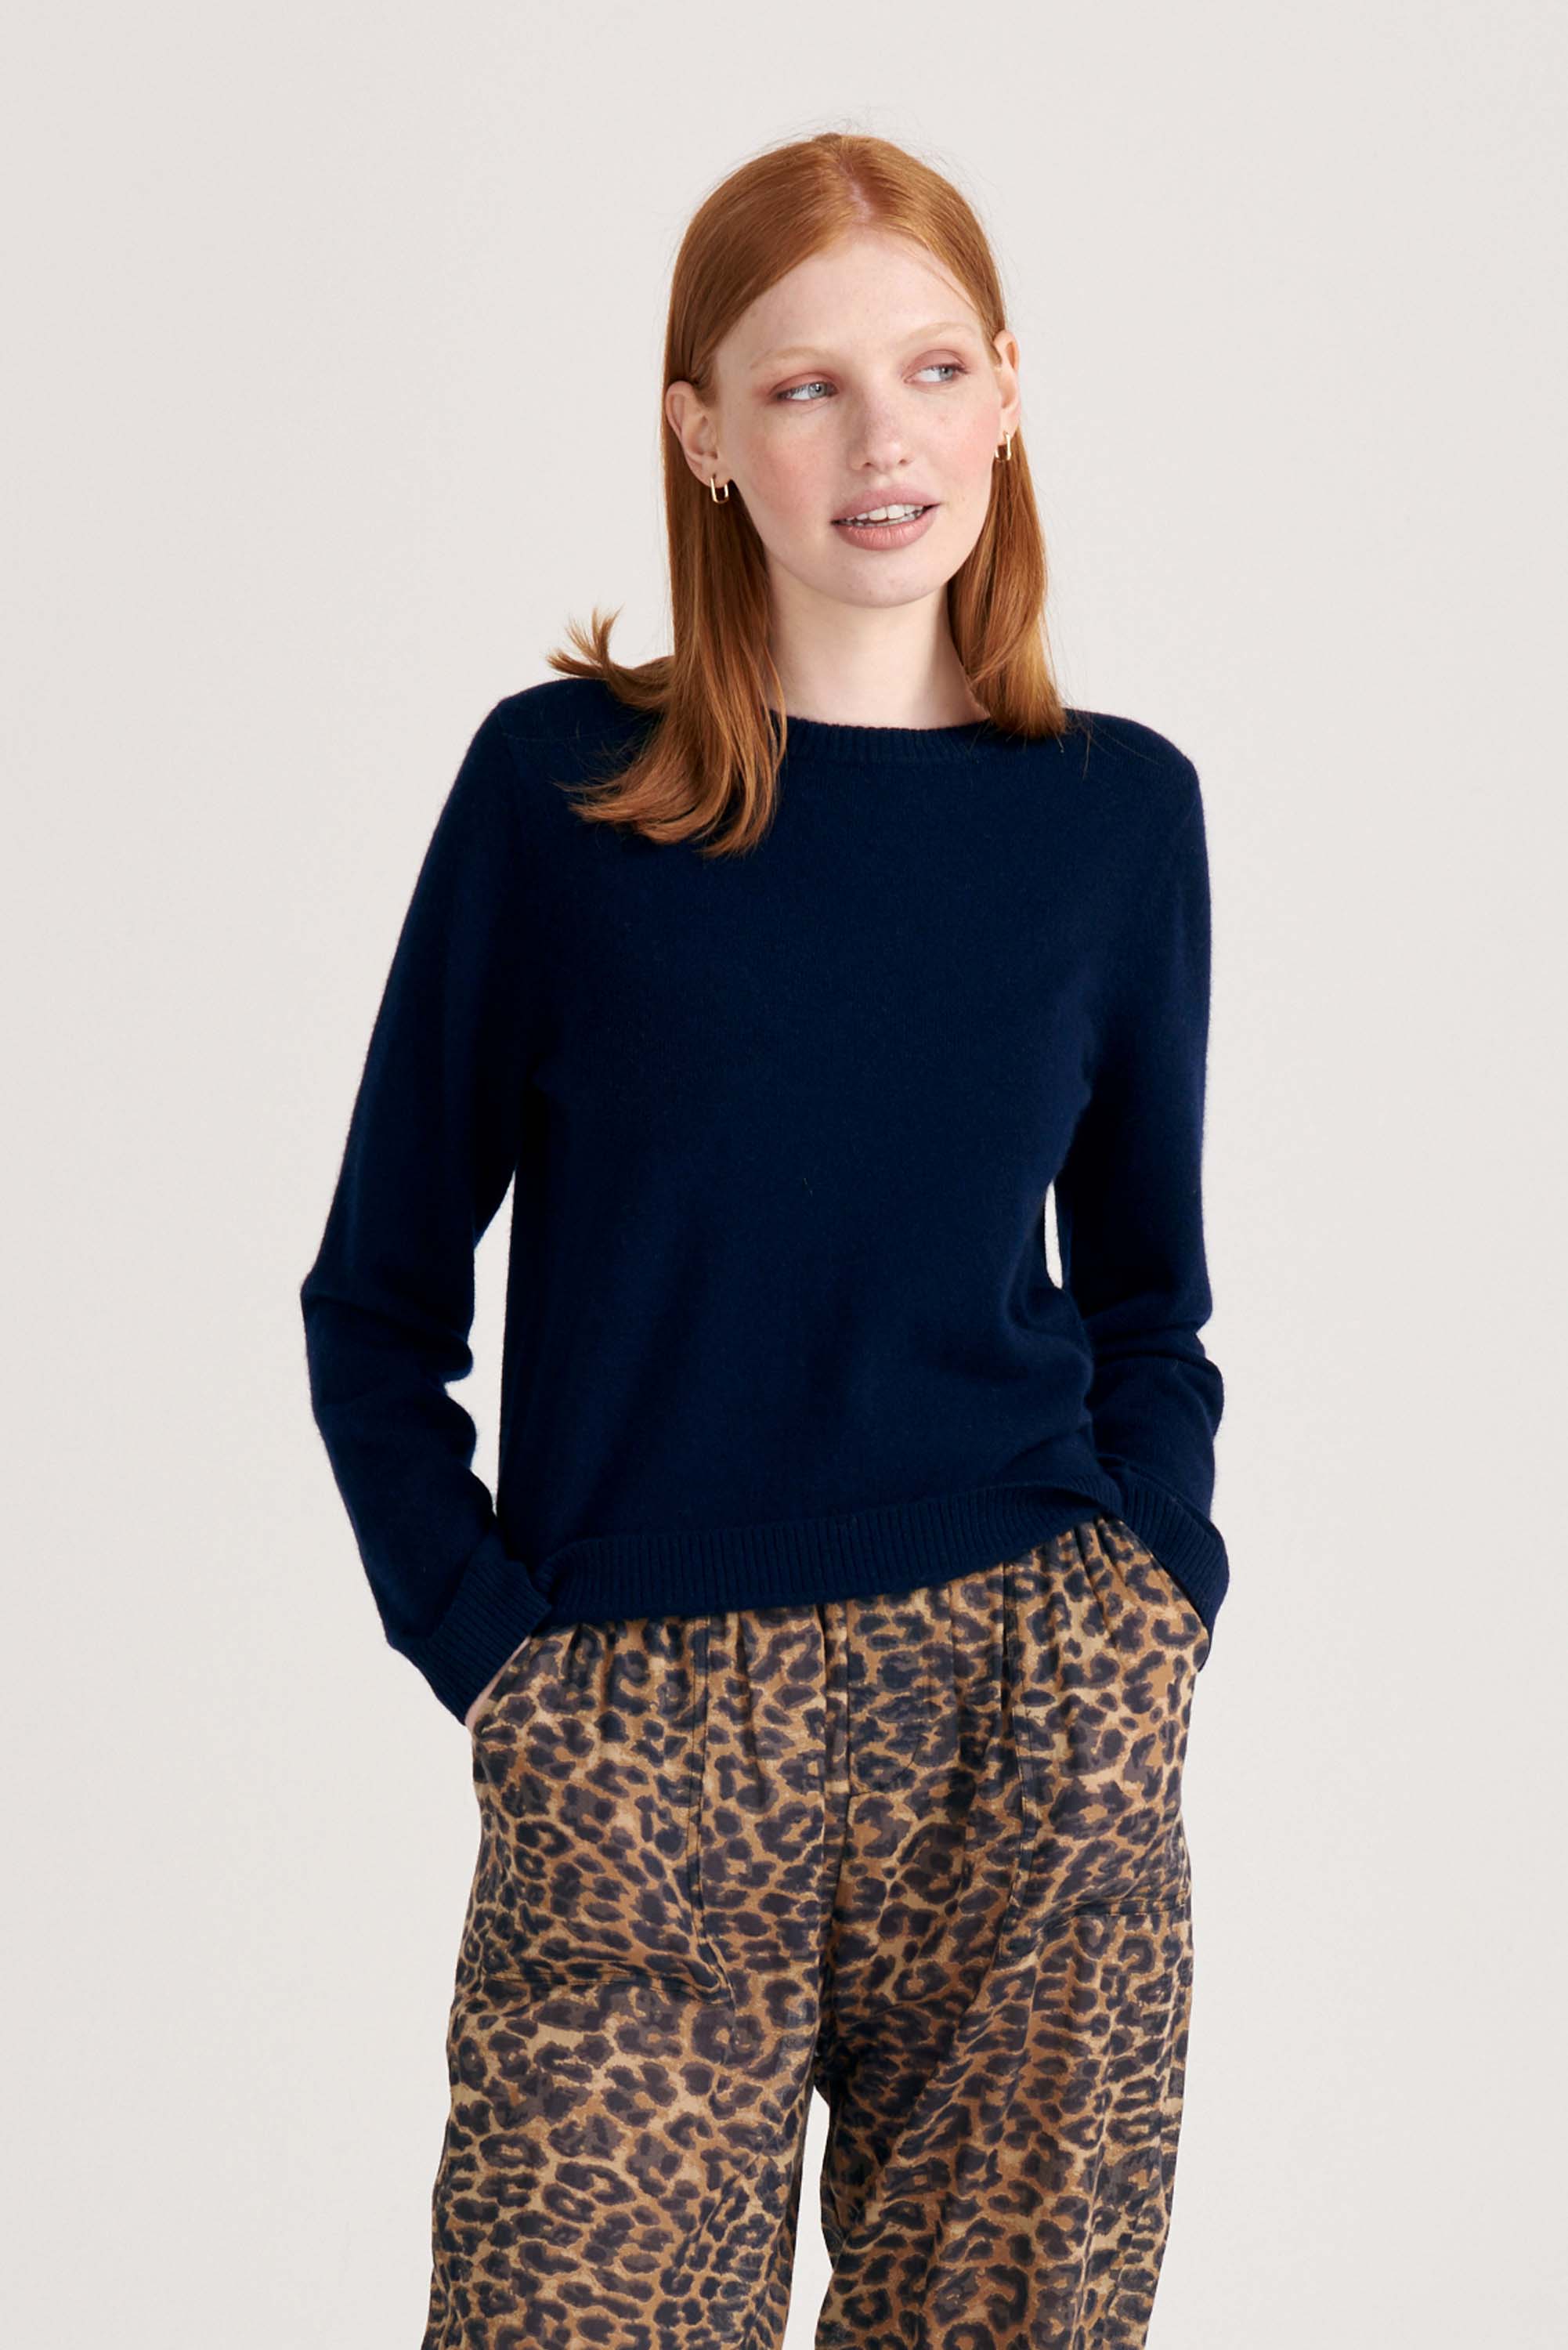 Red haired female model wearing Jumper1234 Navy cashmere crew neck jumper with red love heart intarsia elbow patches